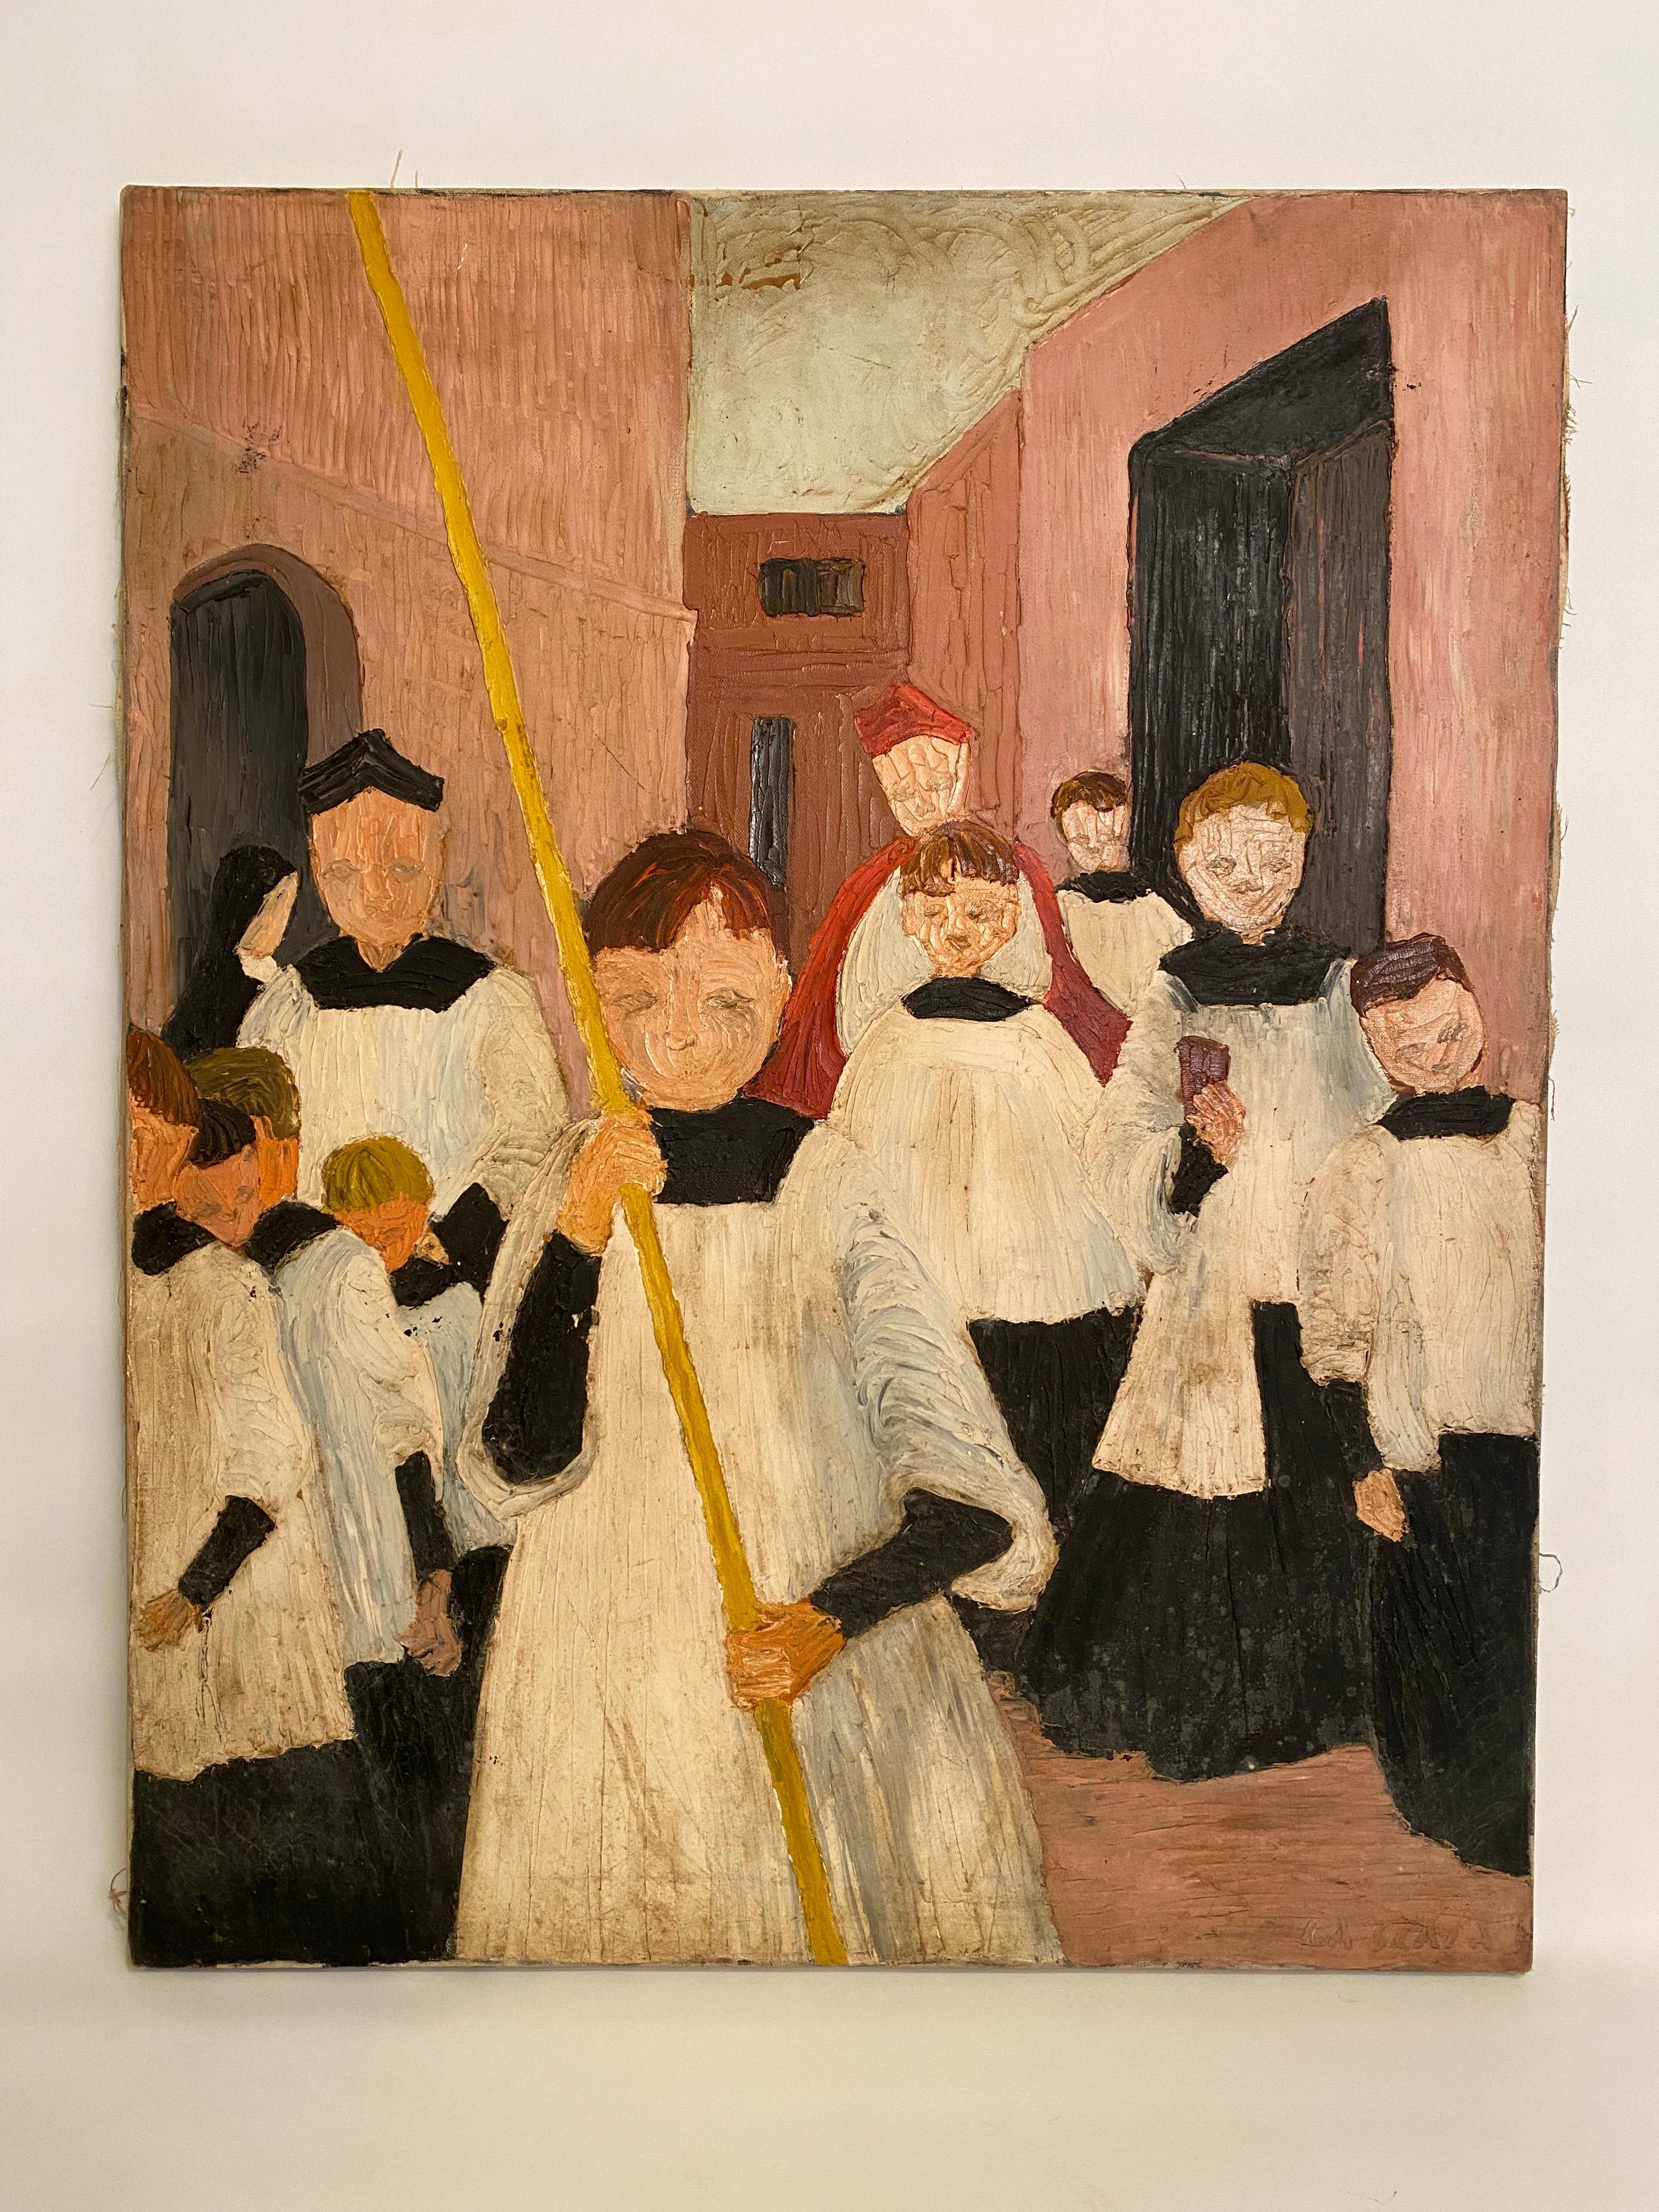 Signed Kitty LaScala modernist procession painting. LaScala has depicted the pomp and ceremony of a Catholic high holy day or Sunday church services. Predominantly faceless characters of altar boys, clergy (bishop or cardinal and a priest) and a